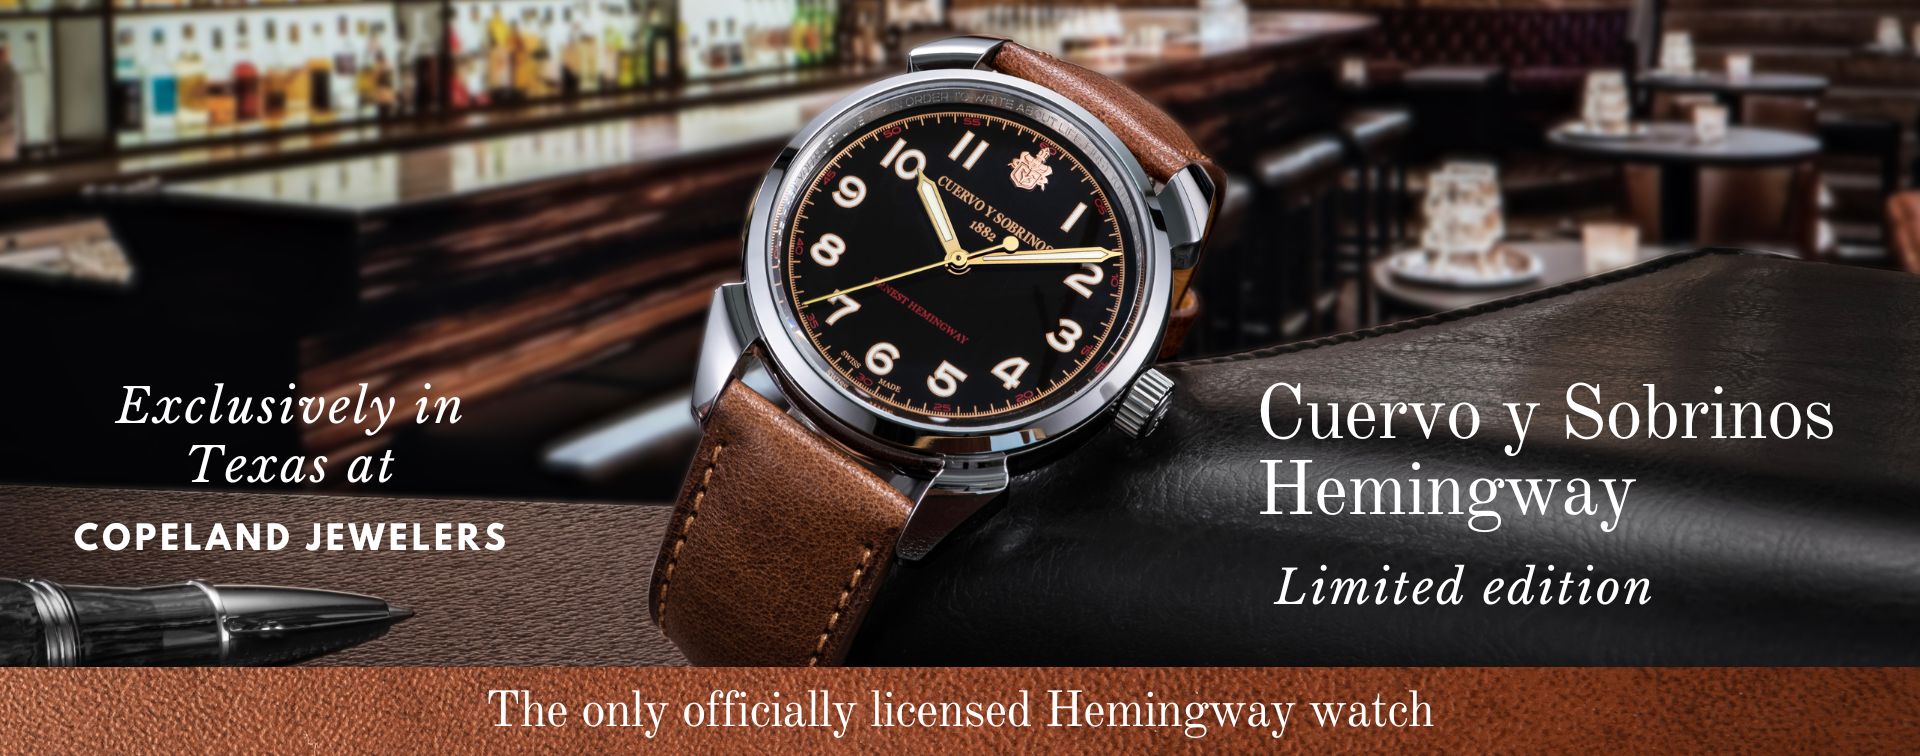 Cuervo y Sobrinos Hemingway available exclusively at Copeland Jewelers in Austin, Texas